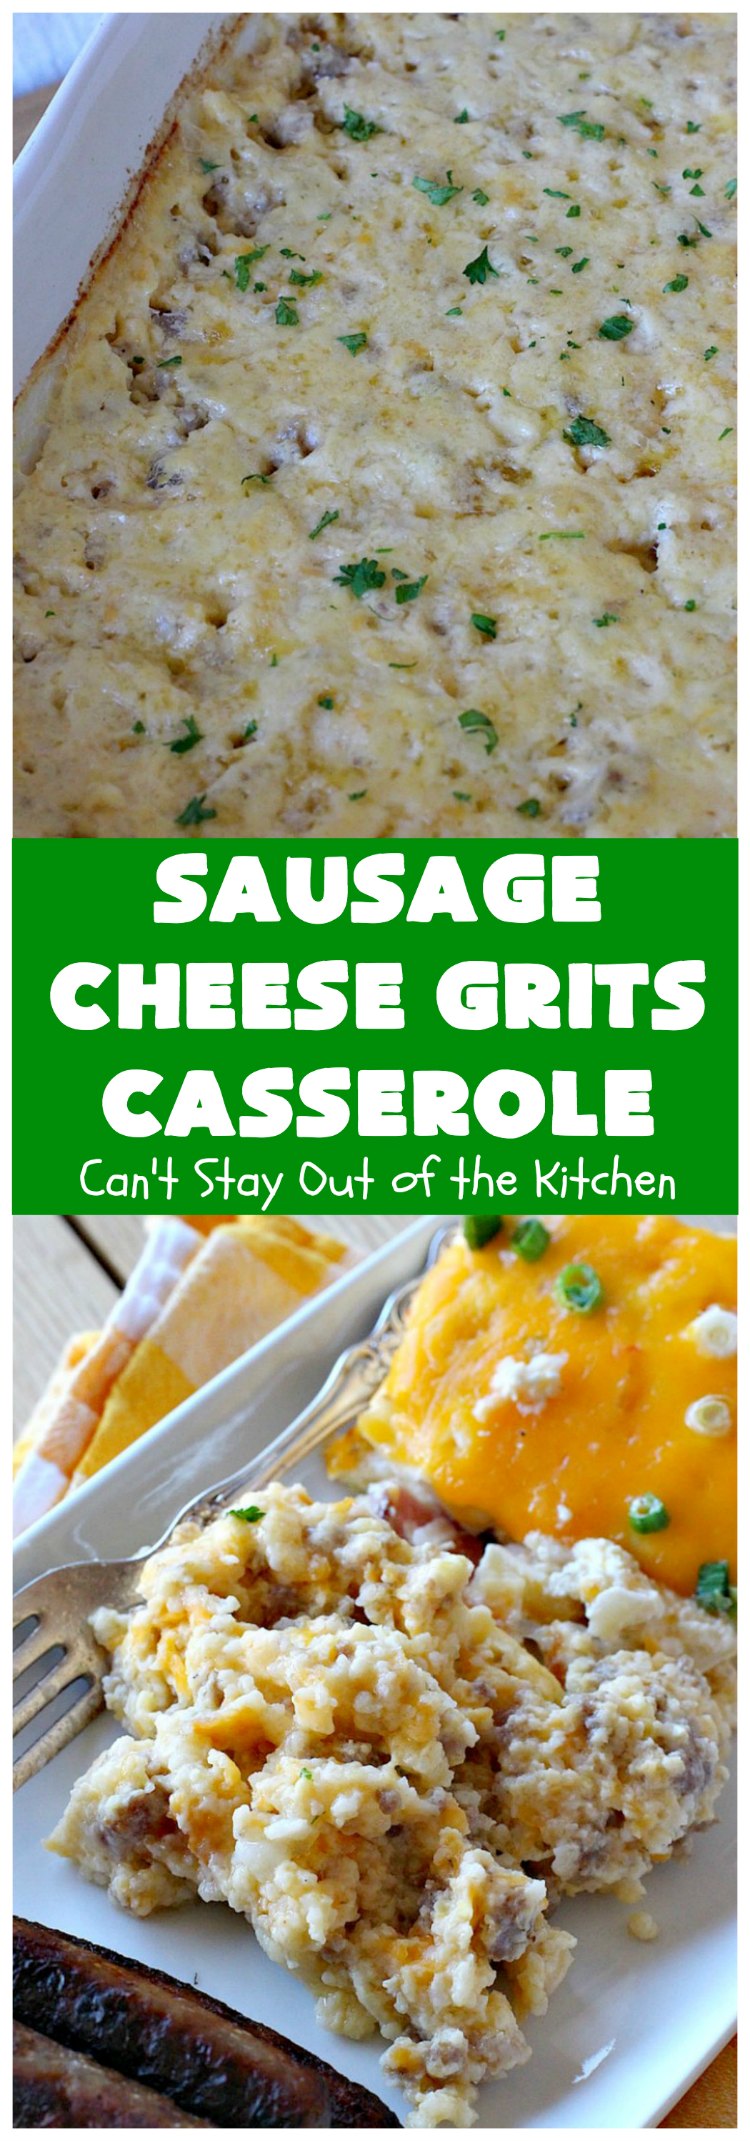 Sausage Cheese Grits Casserole | Can't Stay Out of the Kitchen